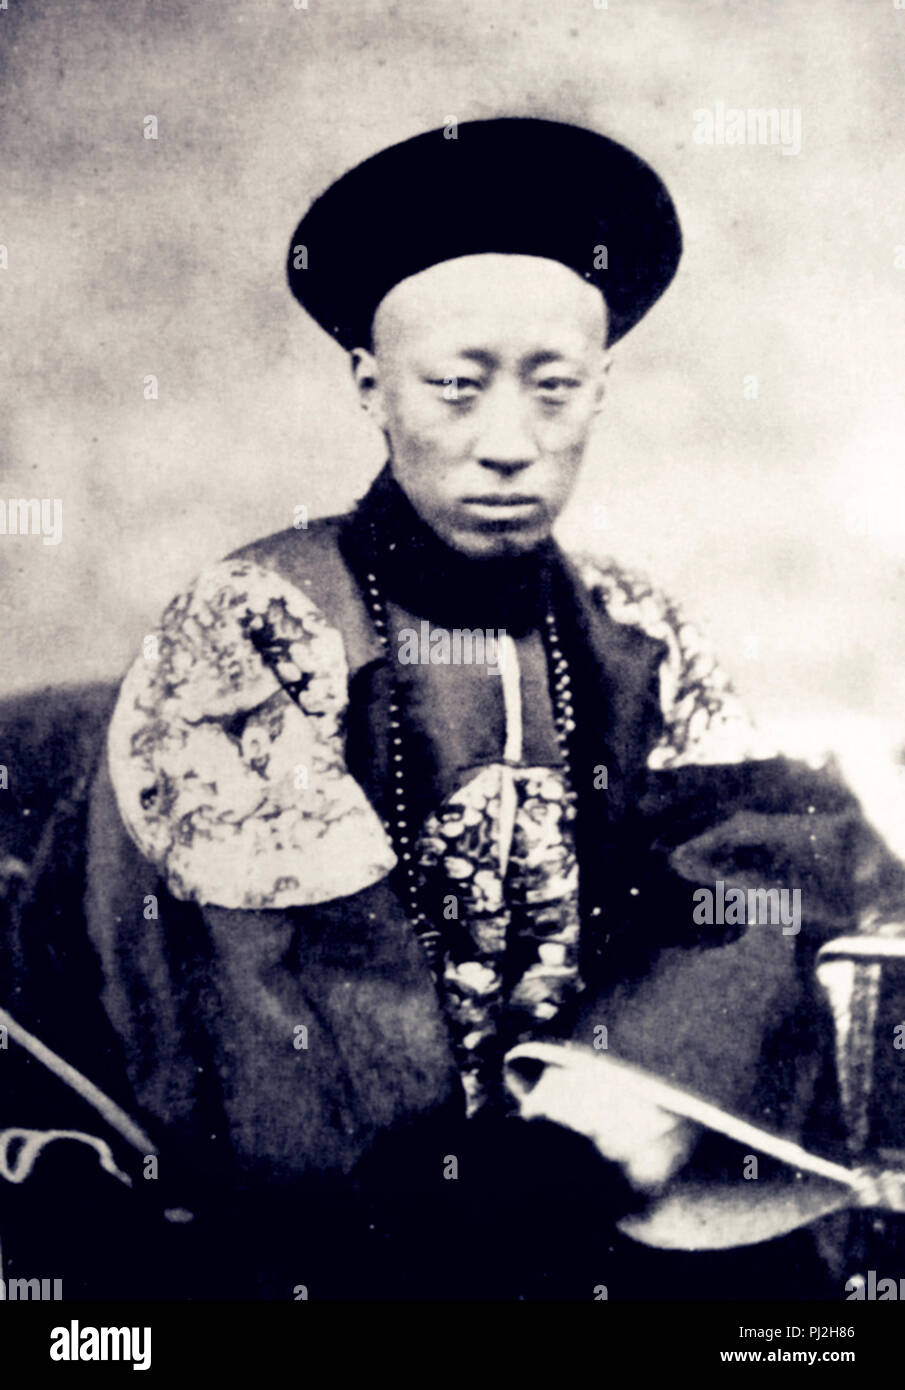 Prince Gong, Cixi's crucial ally during the Xinyou Coup. He was